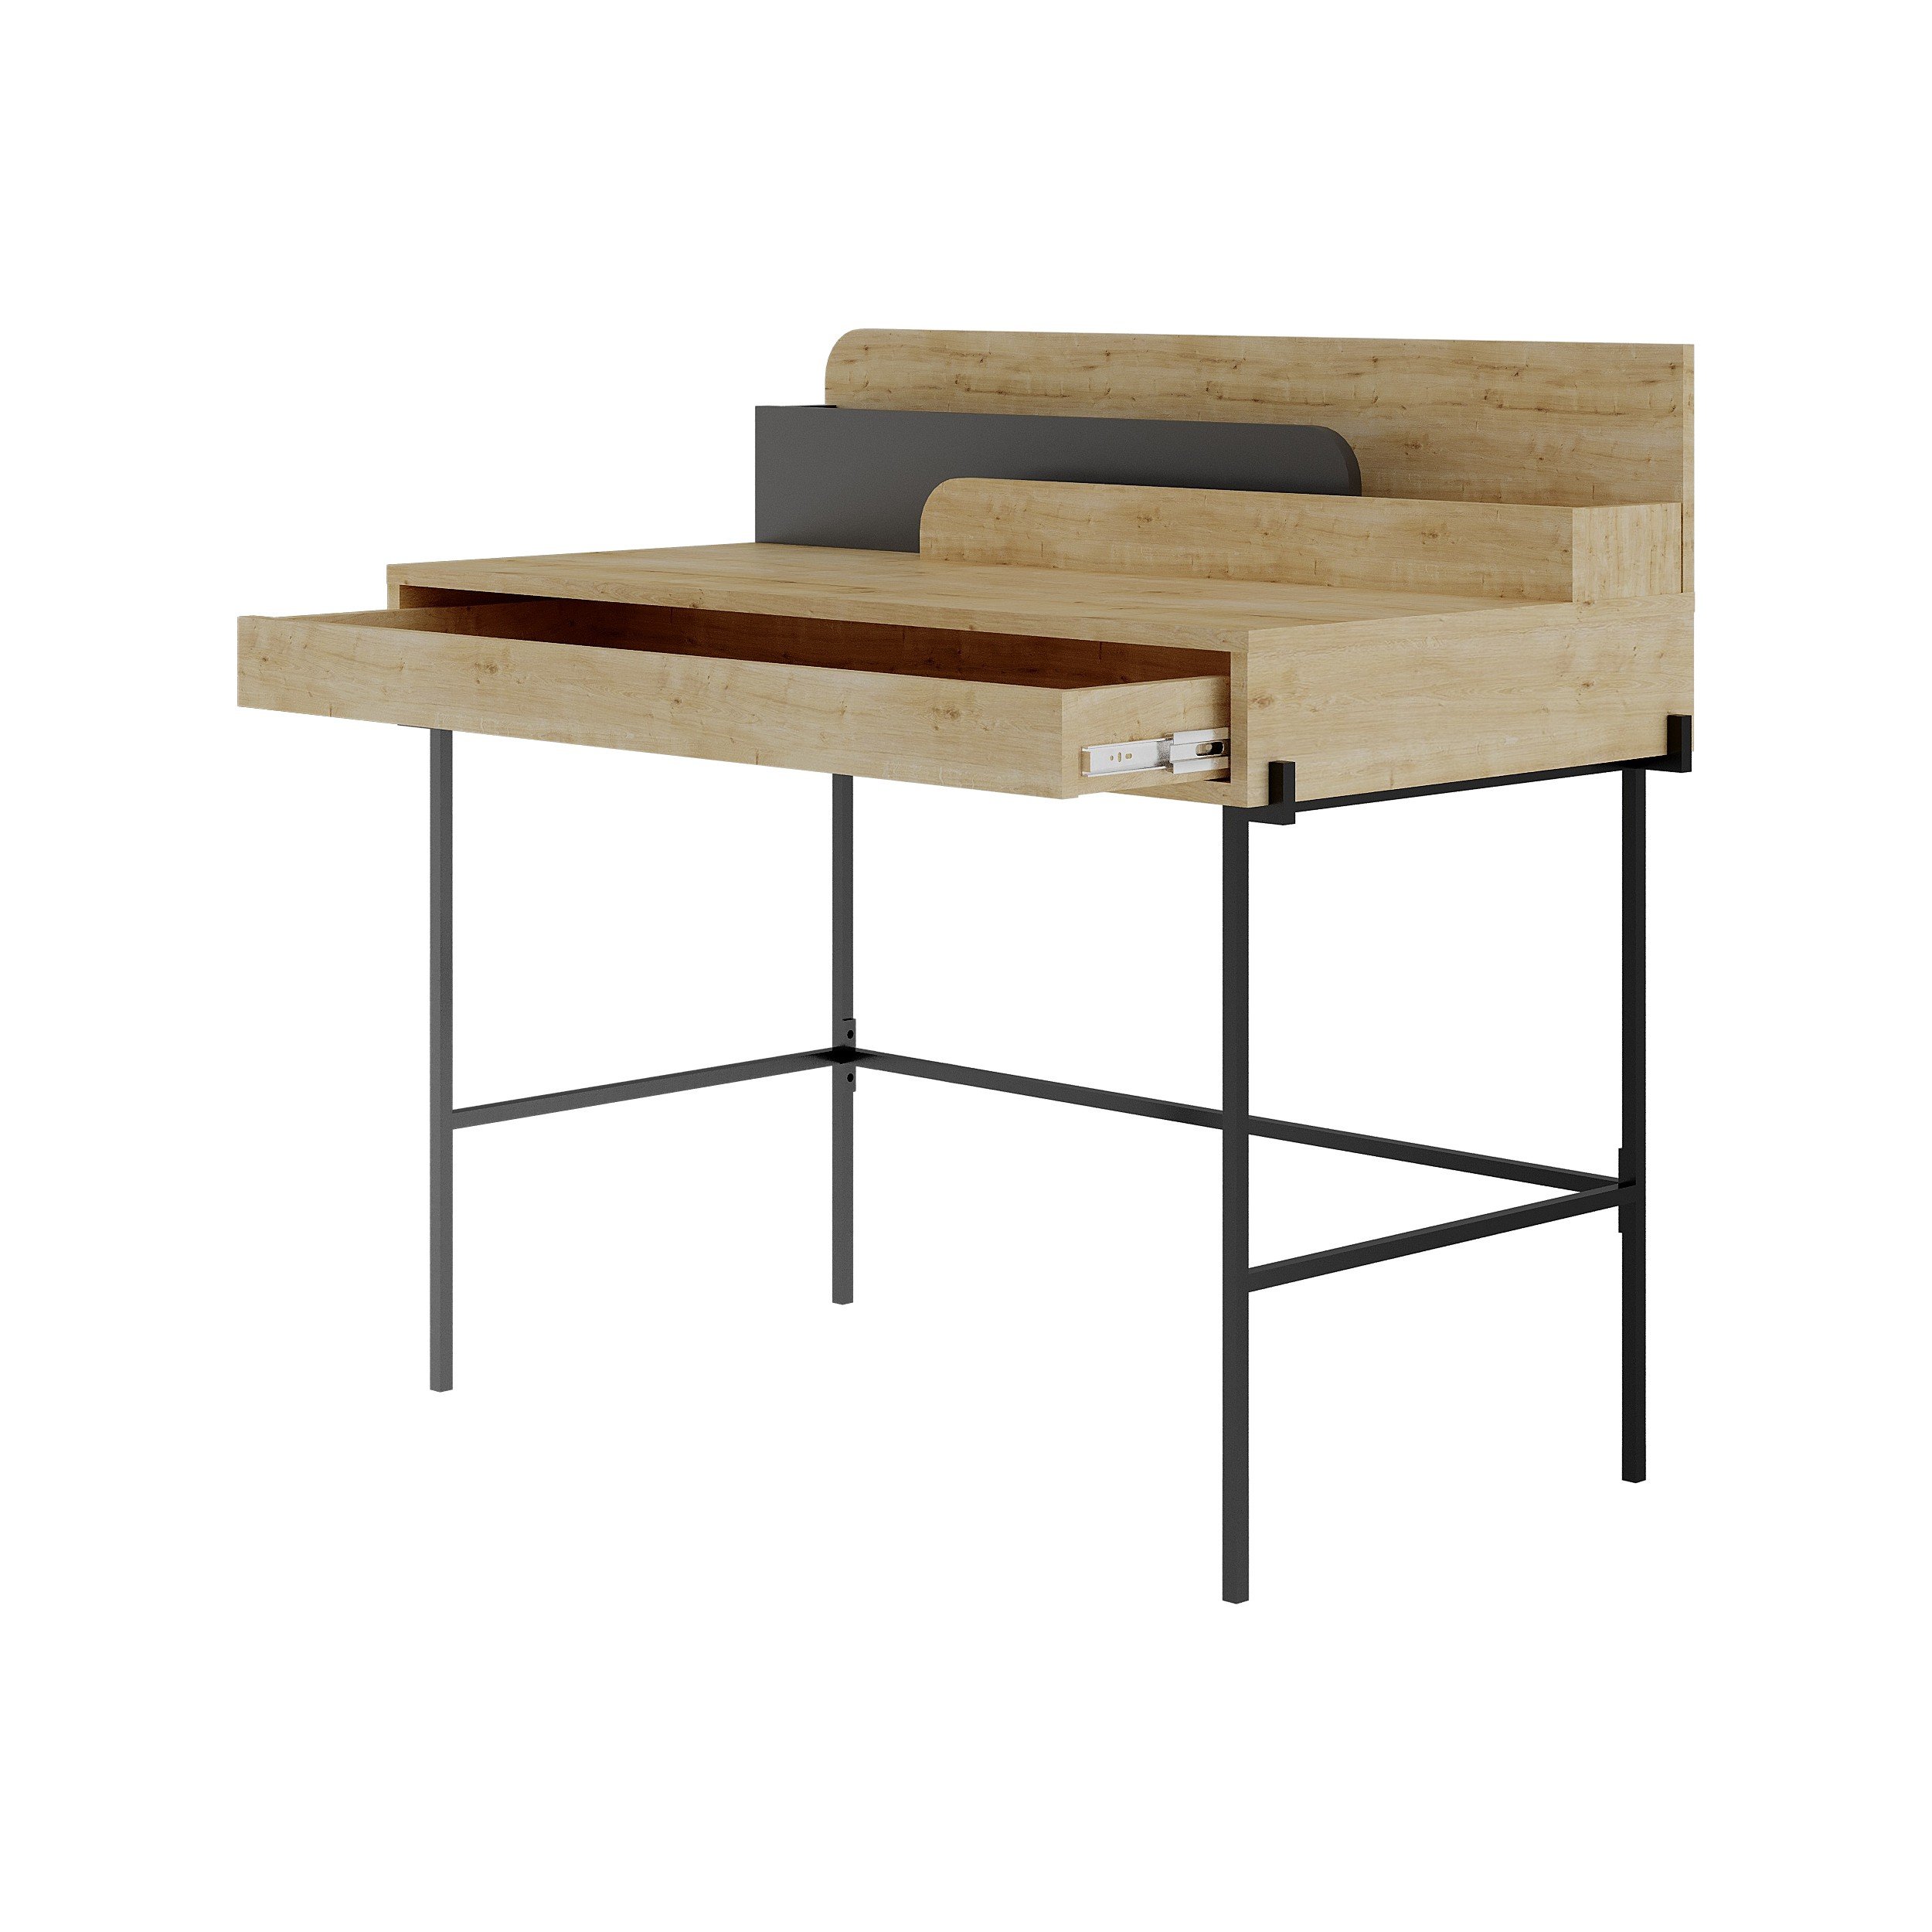 LEILA WORKING TABLE - OAK - ANTHRACITE M.MS.23313.6